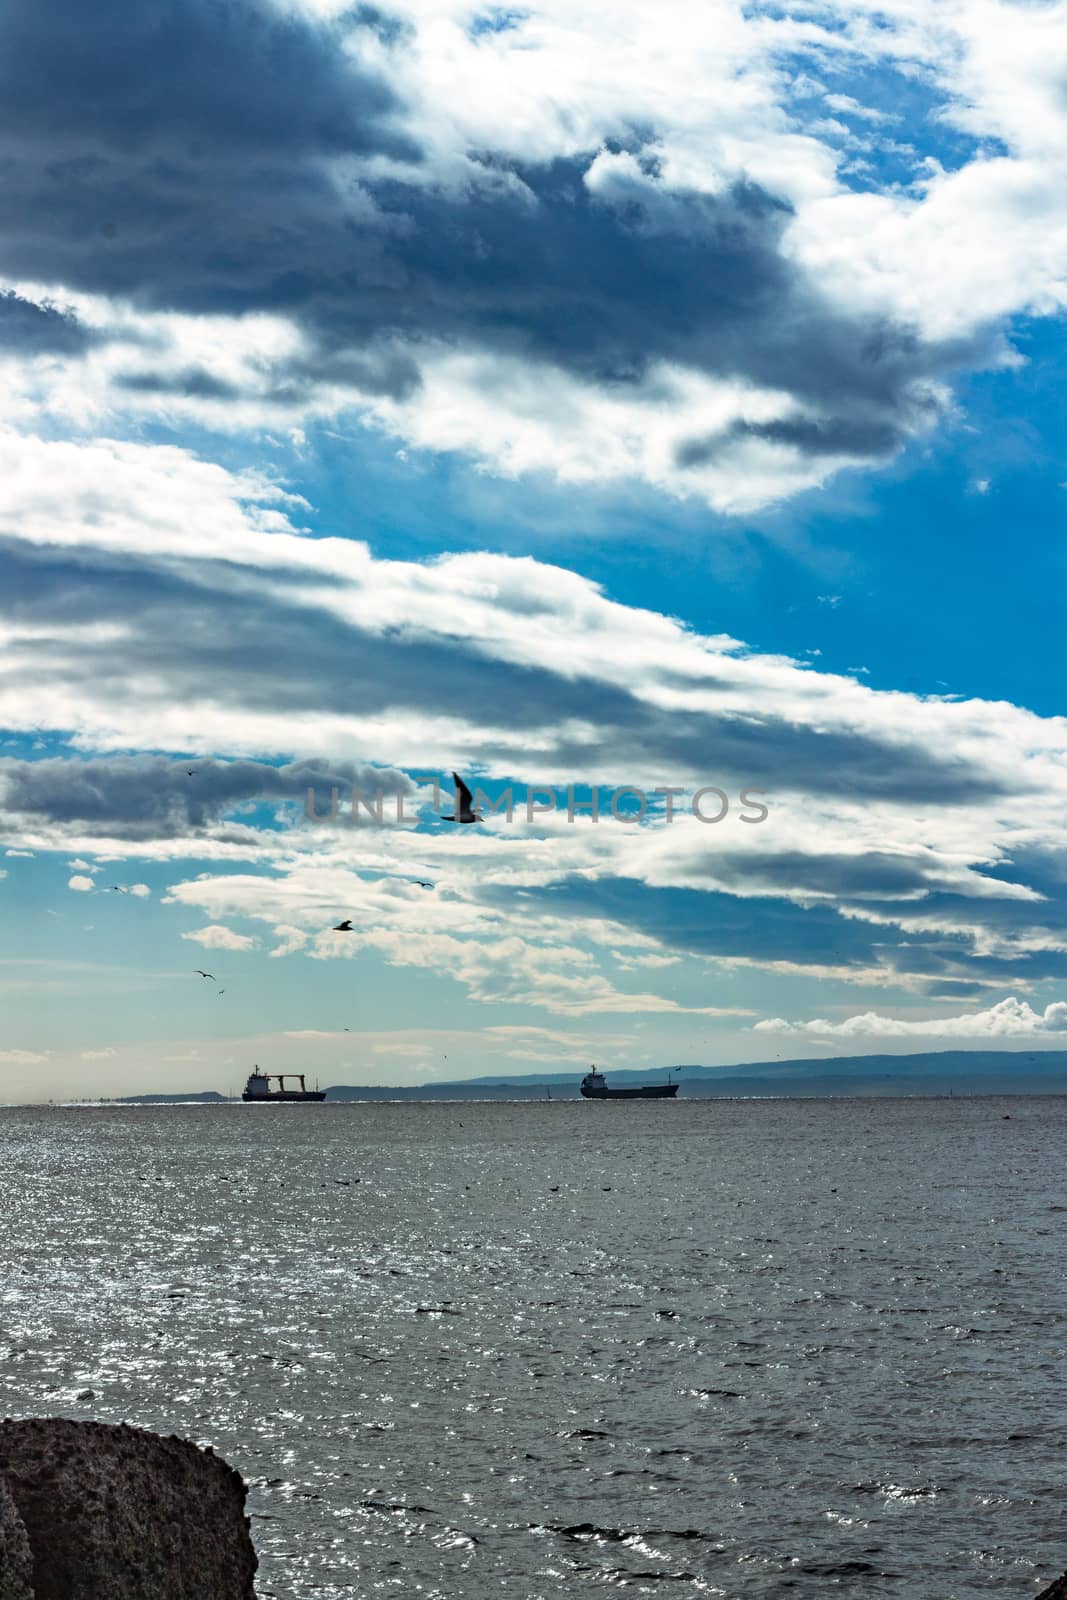 Cargo ships and seagulls on a spring day in the Mediterranean Sea